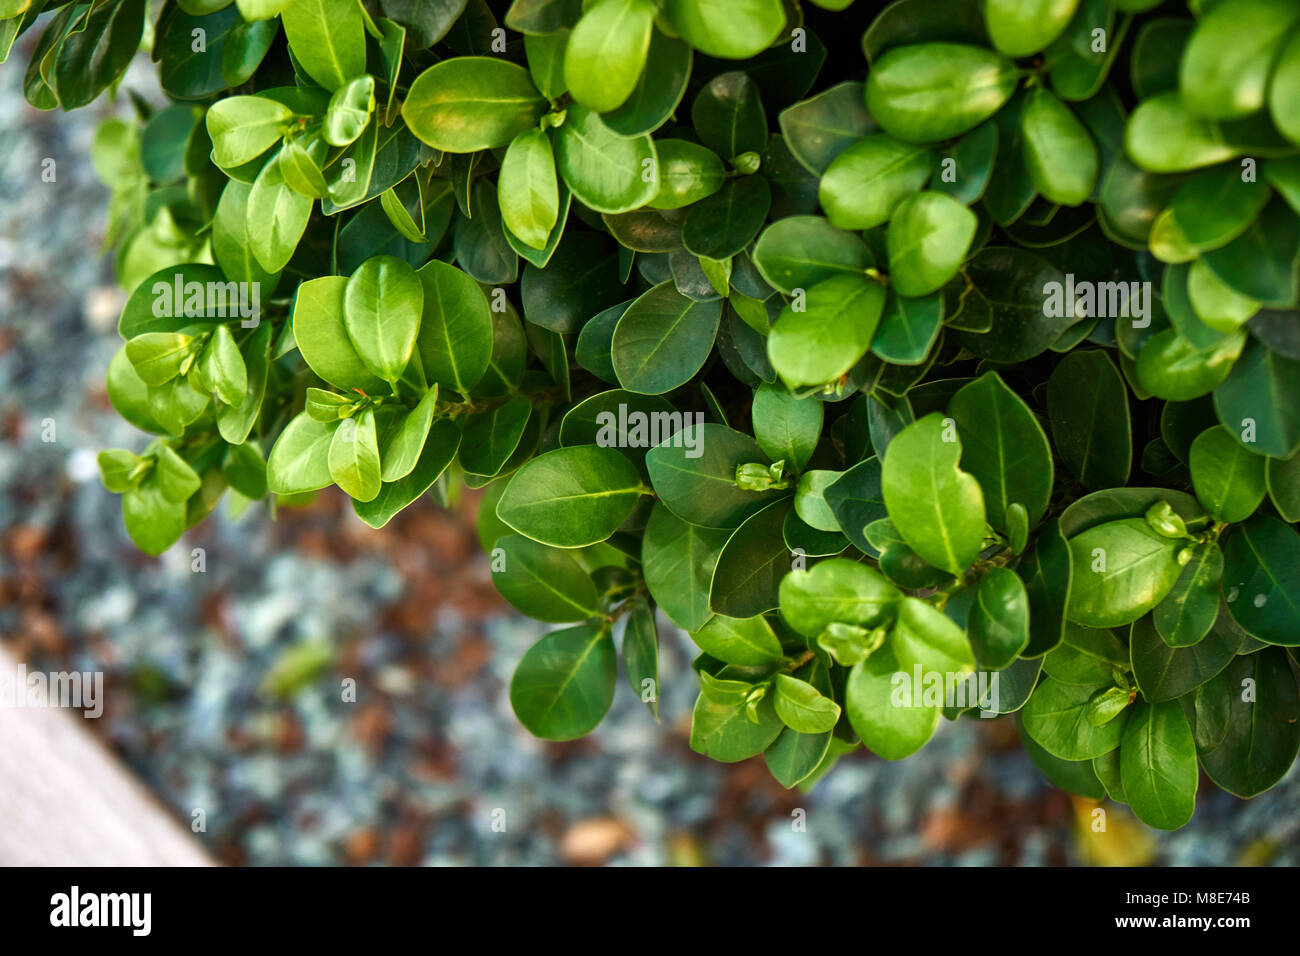 Buxus sempervirens. Fresh green buxus leaves closeup as background. Natural pattern, nature texture Stock Photo